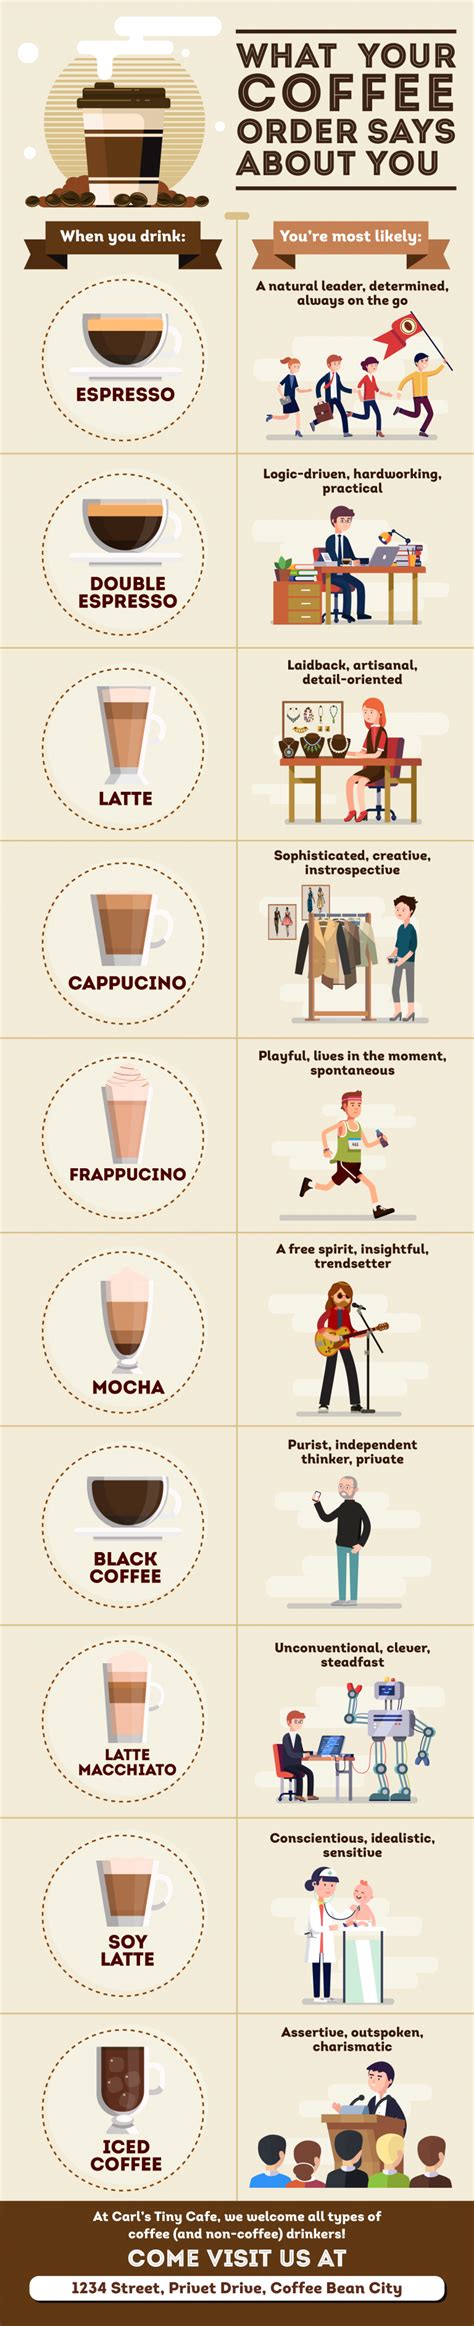 What Your Coffee Order Says About You Simple Infographic Maker Tool